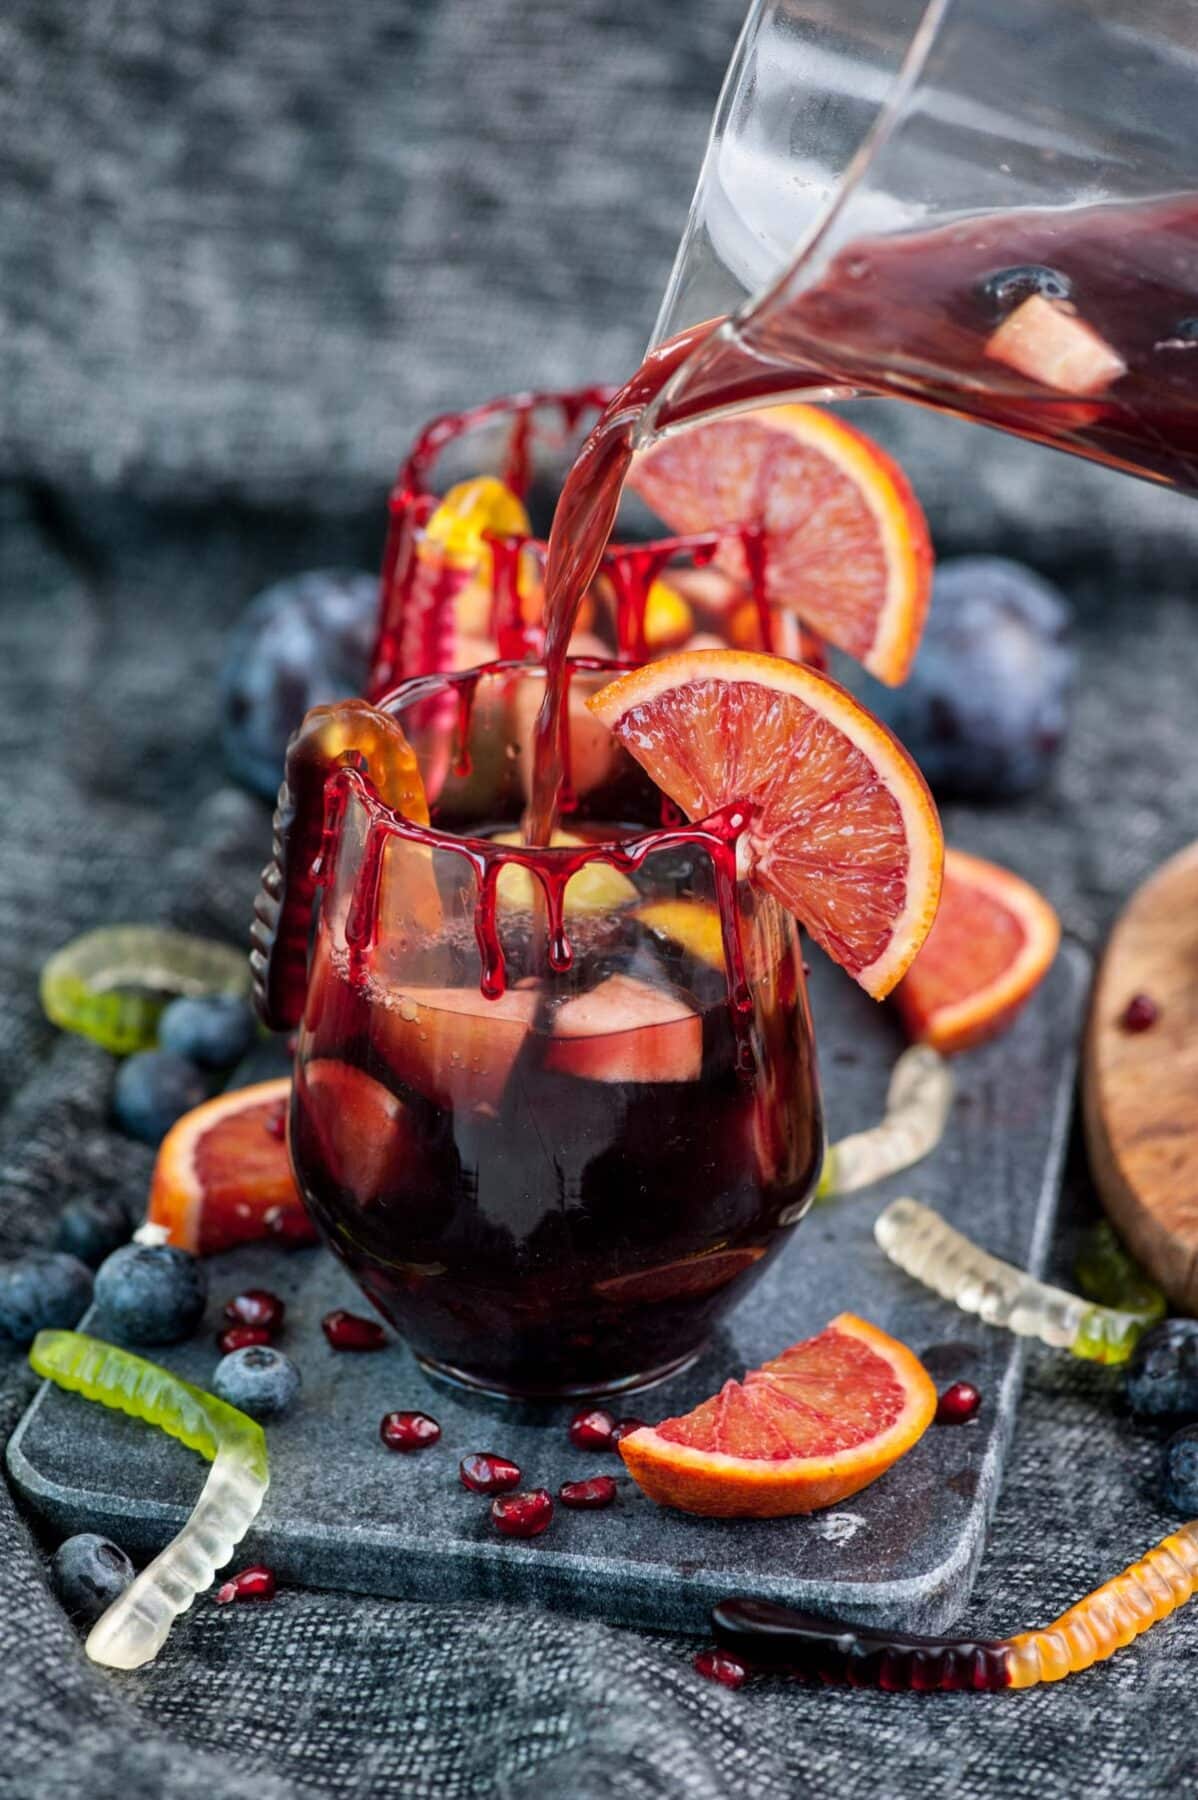 Sangria is being poured into two glasses garnished with blood orange slices and fake blood drips.